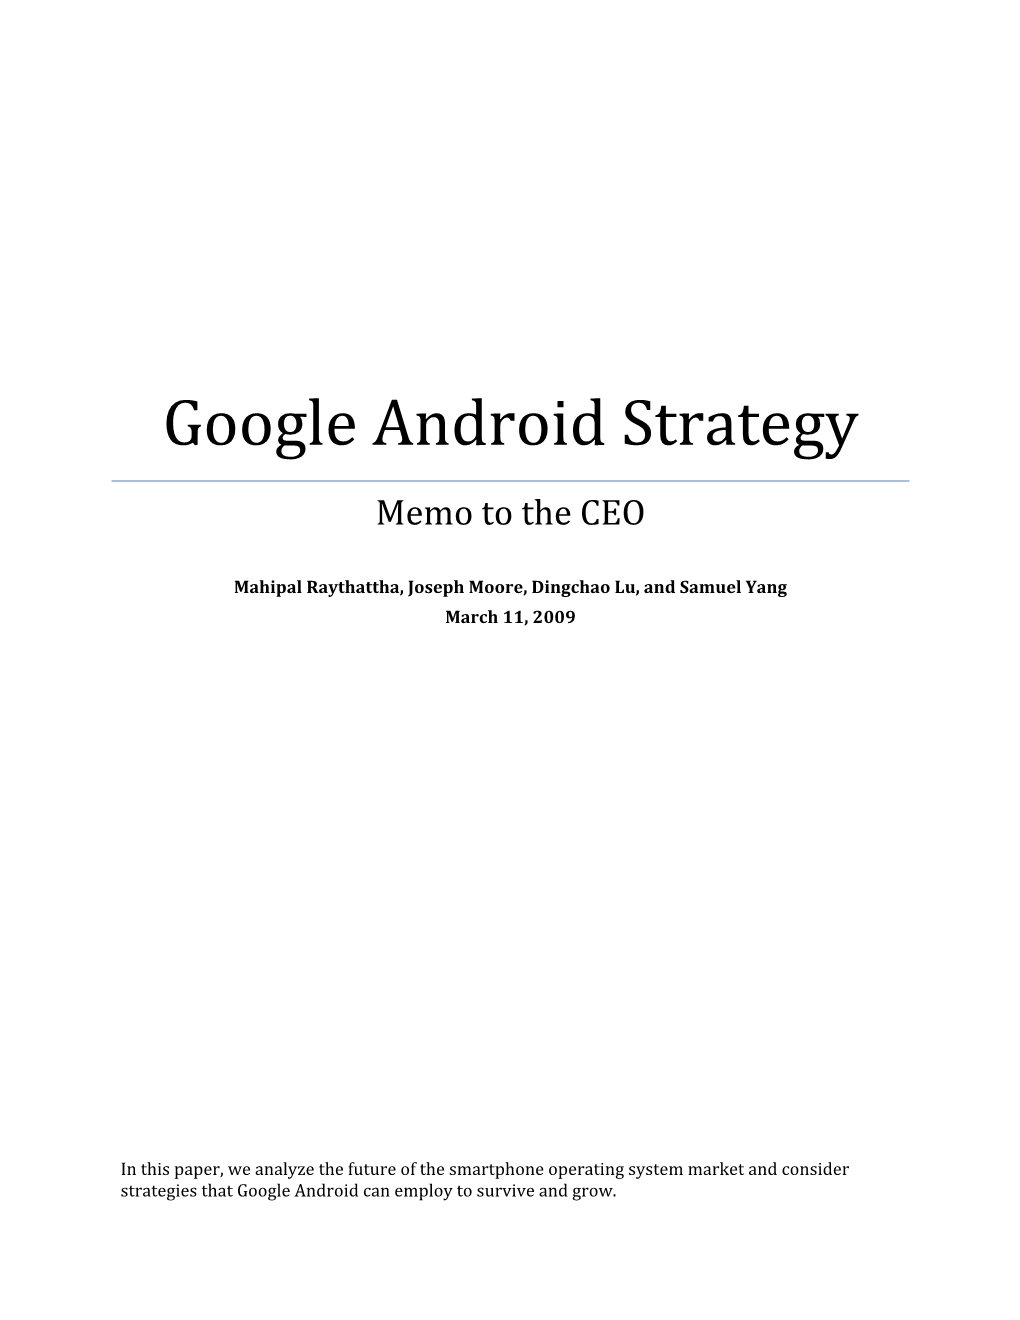 Google Android Strategy Memo to the CEO